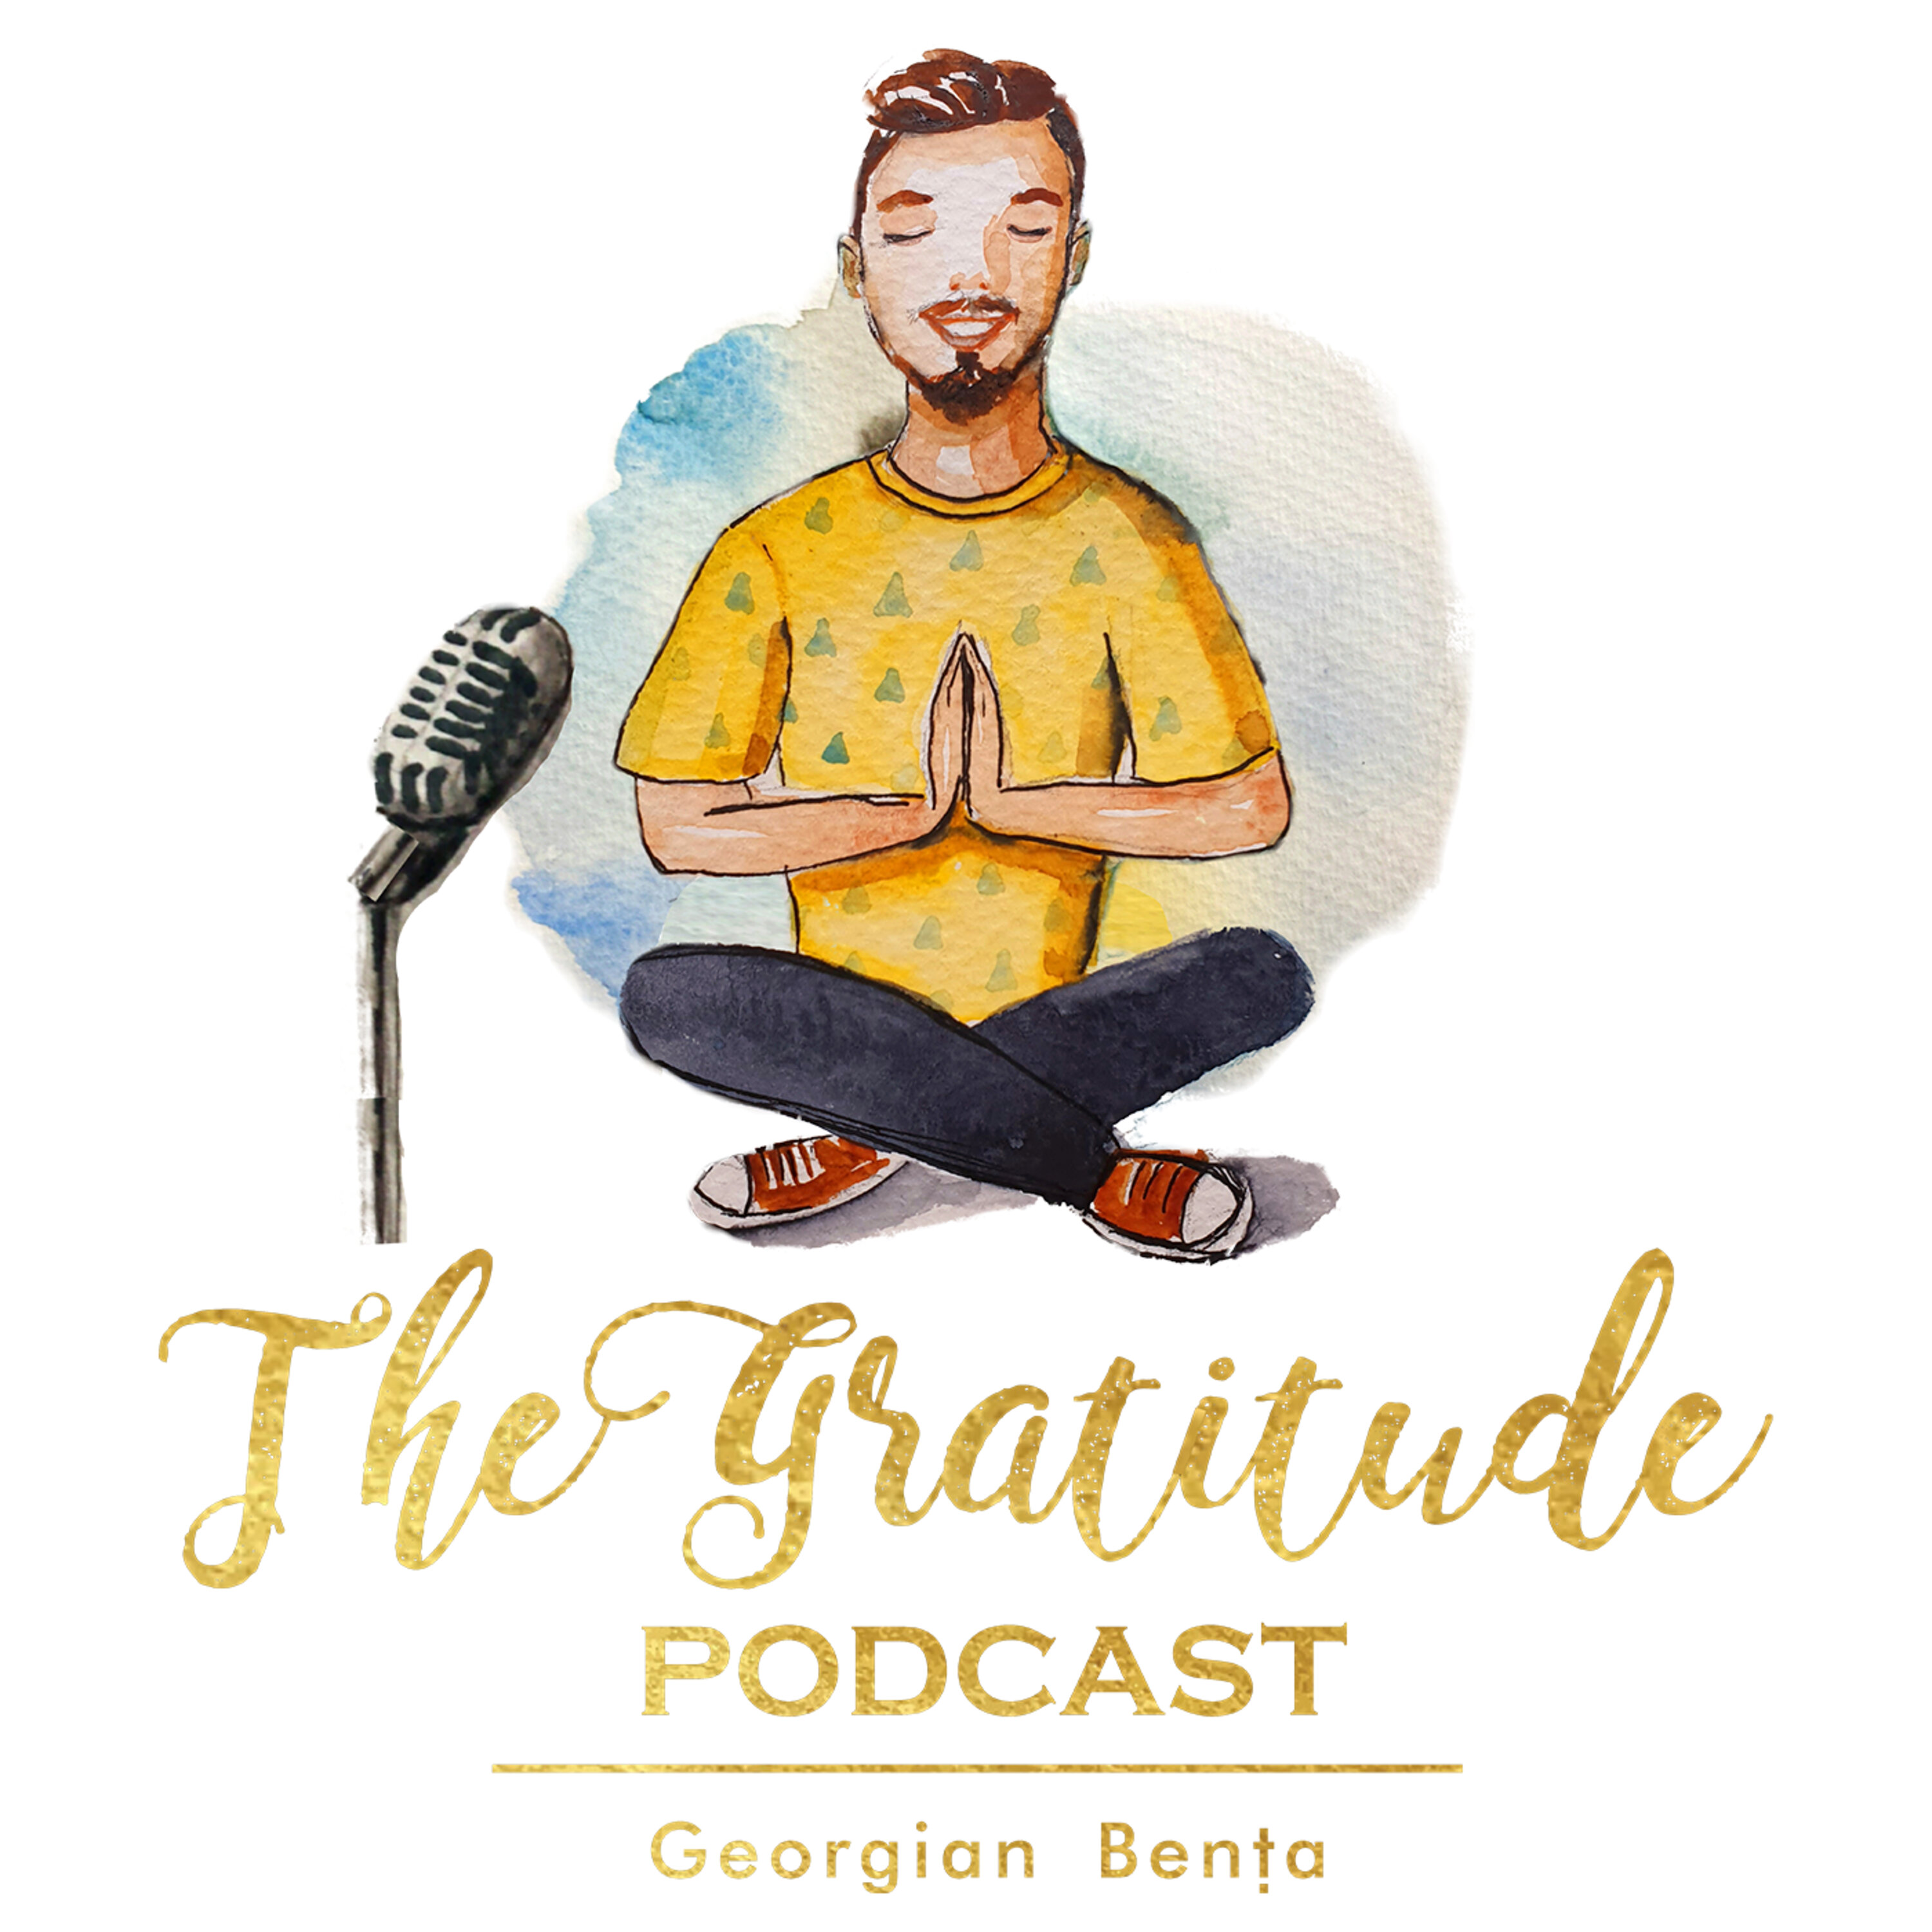 Slow Down When Your Mind Is Racing, With Gratitude - Dr. Serena Sterling (ep. 689)